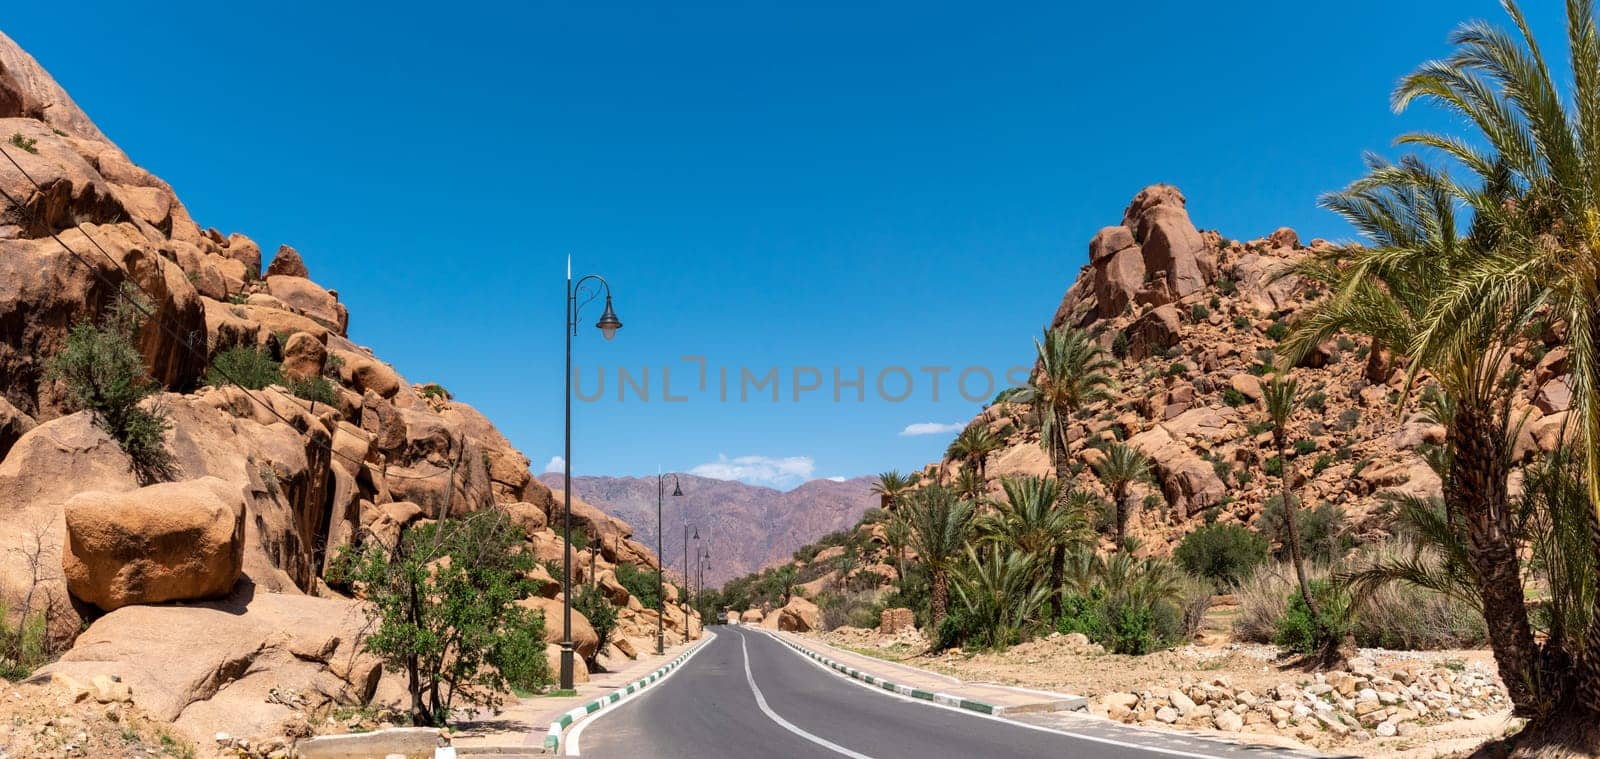 Driving through the scenic Tafraoute valley in the Anti-Atlas mountains by imagoDens